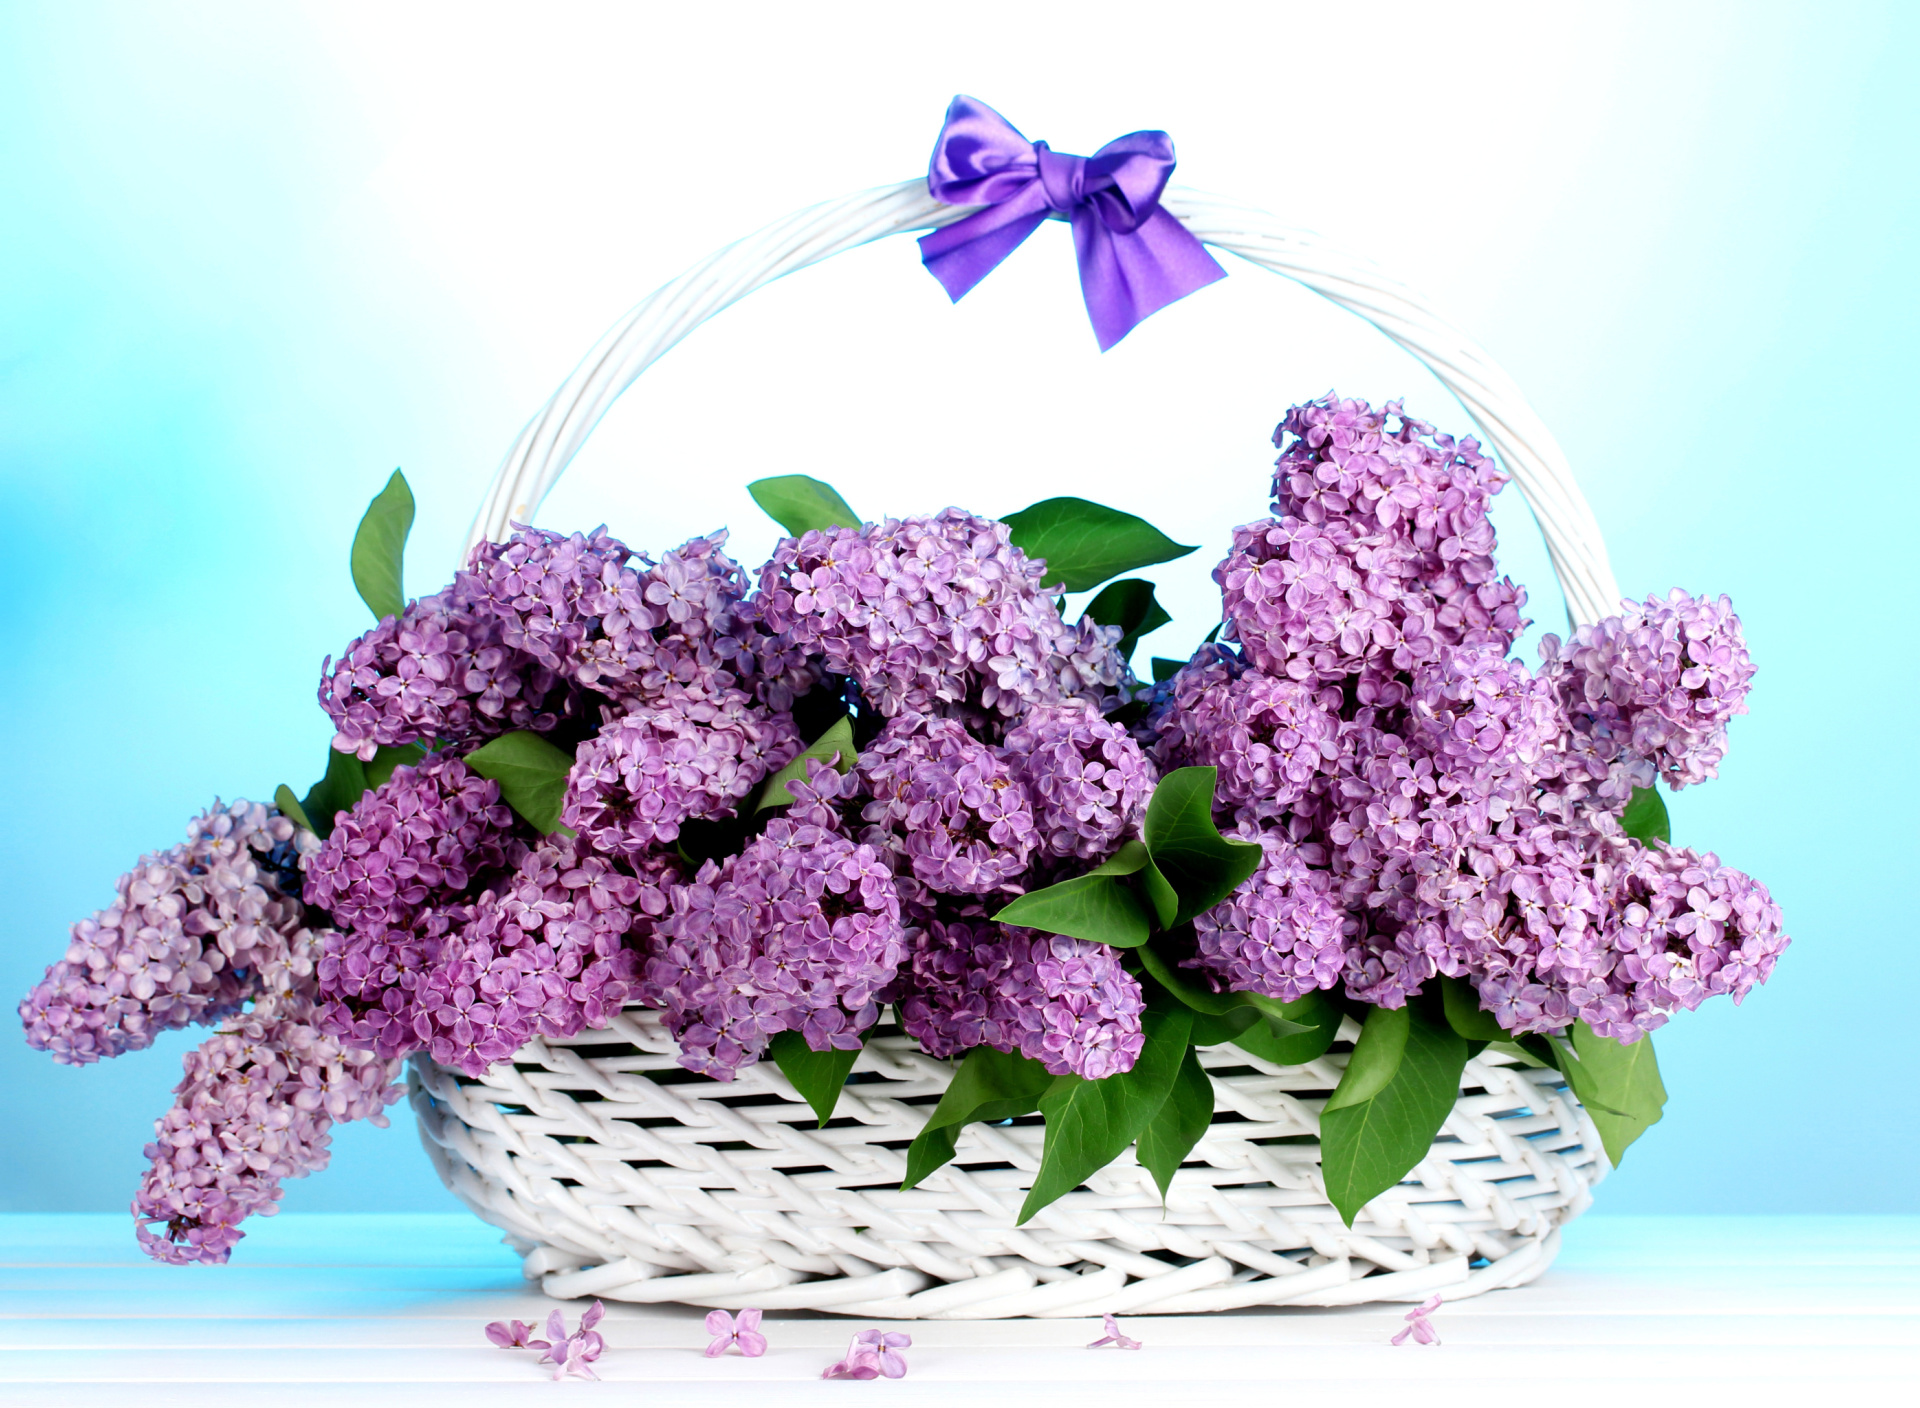 Das Baskets with lilac flowers Wallpaper 1920x1408